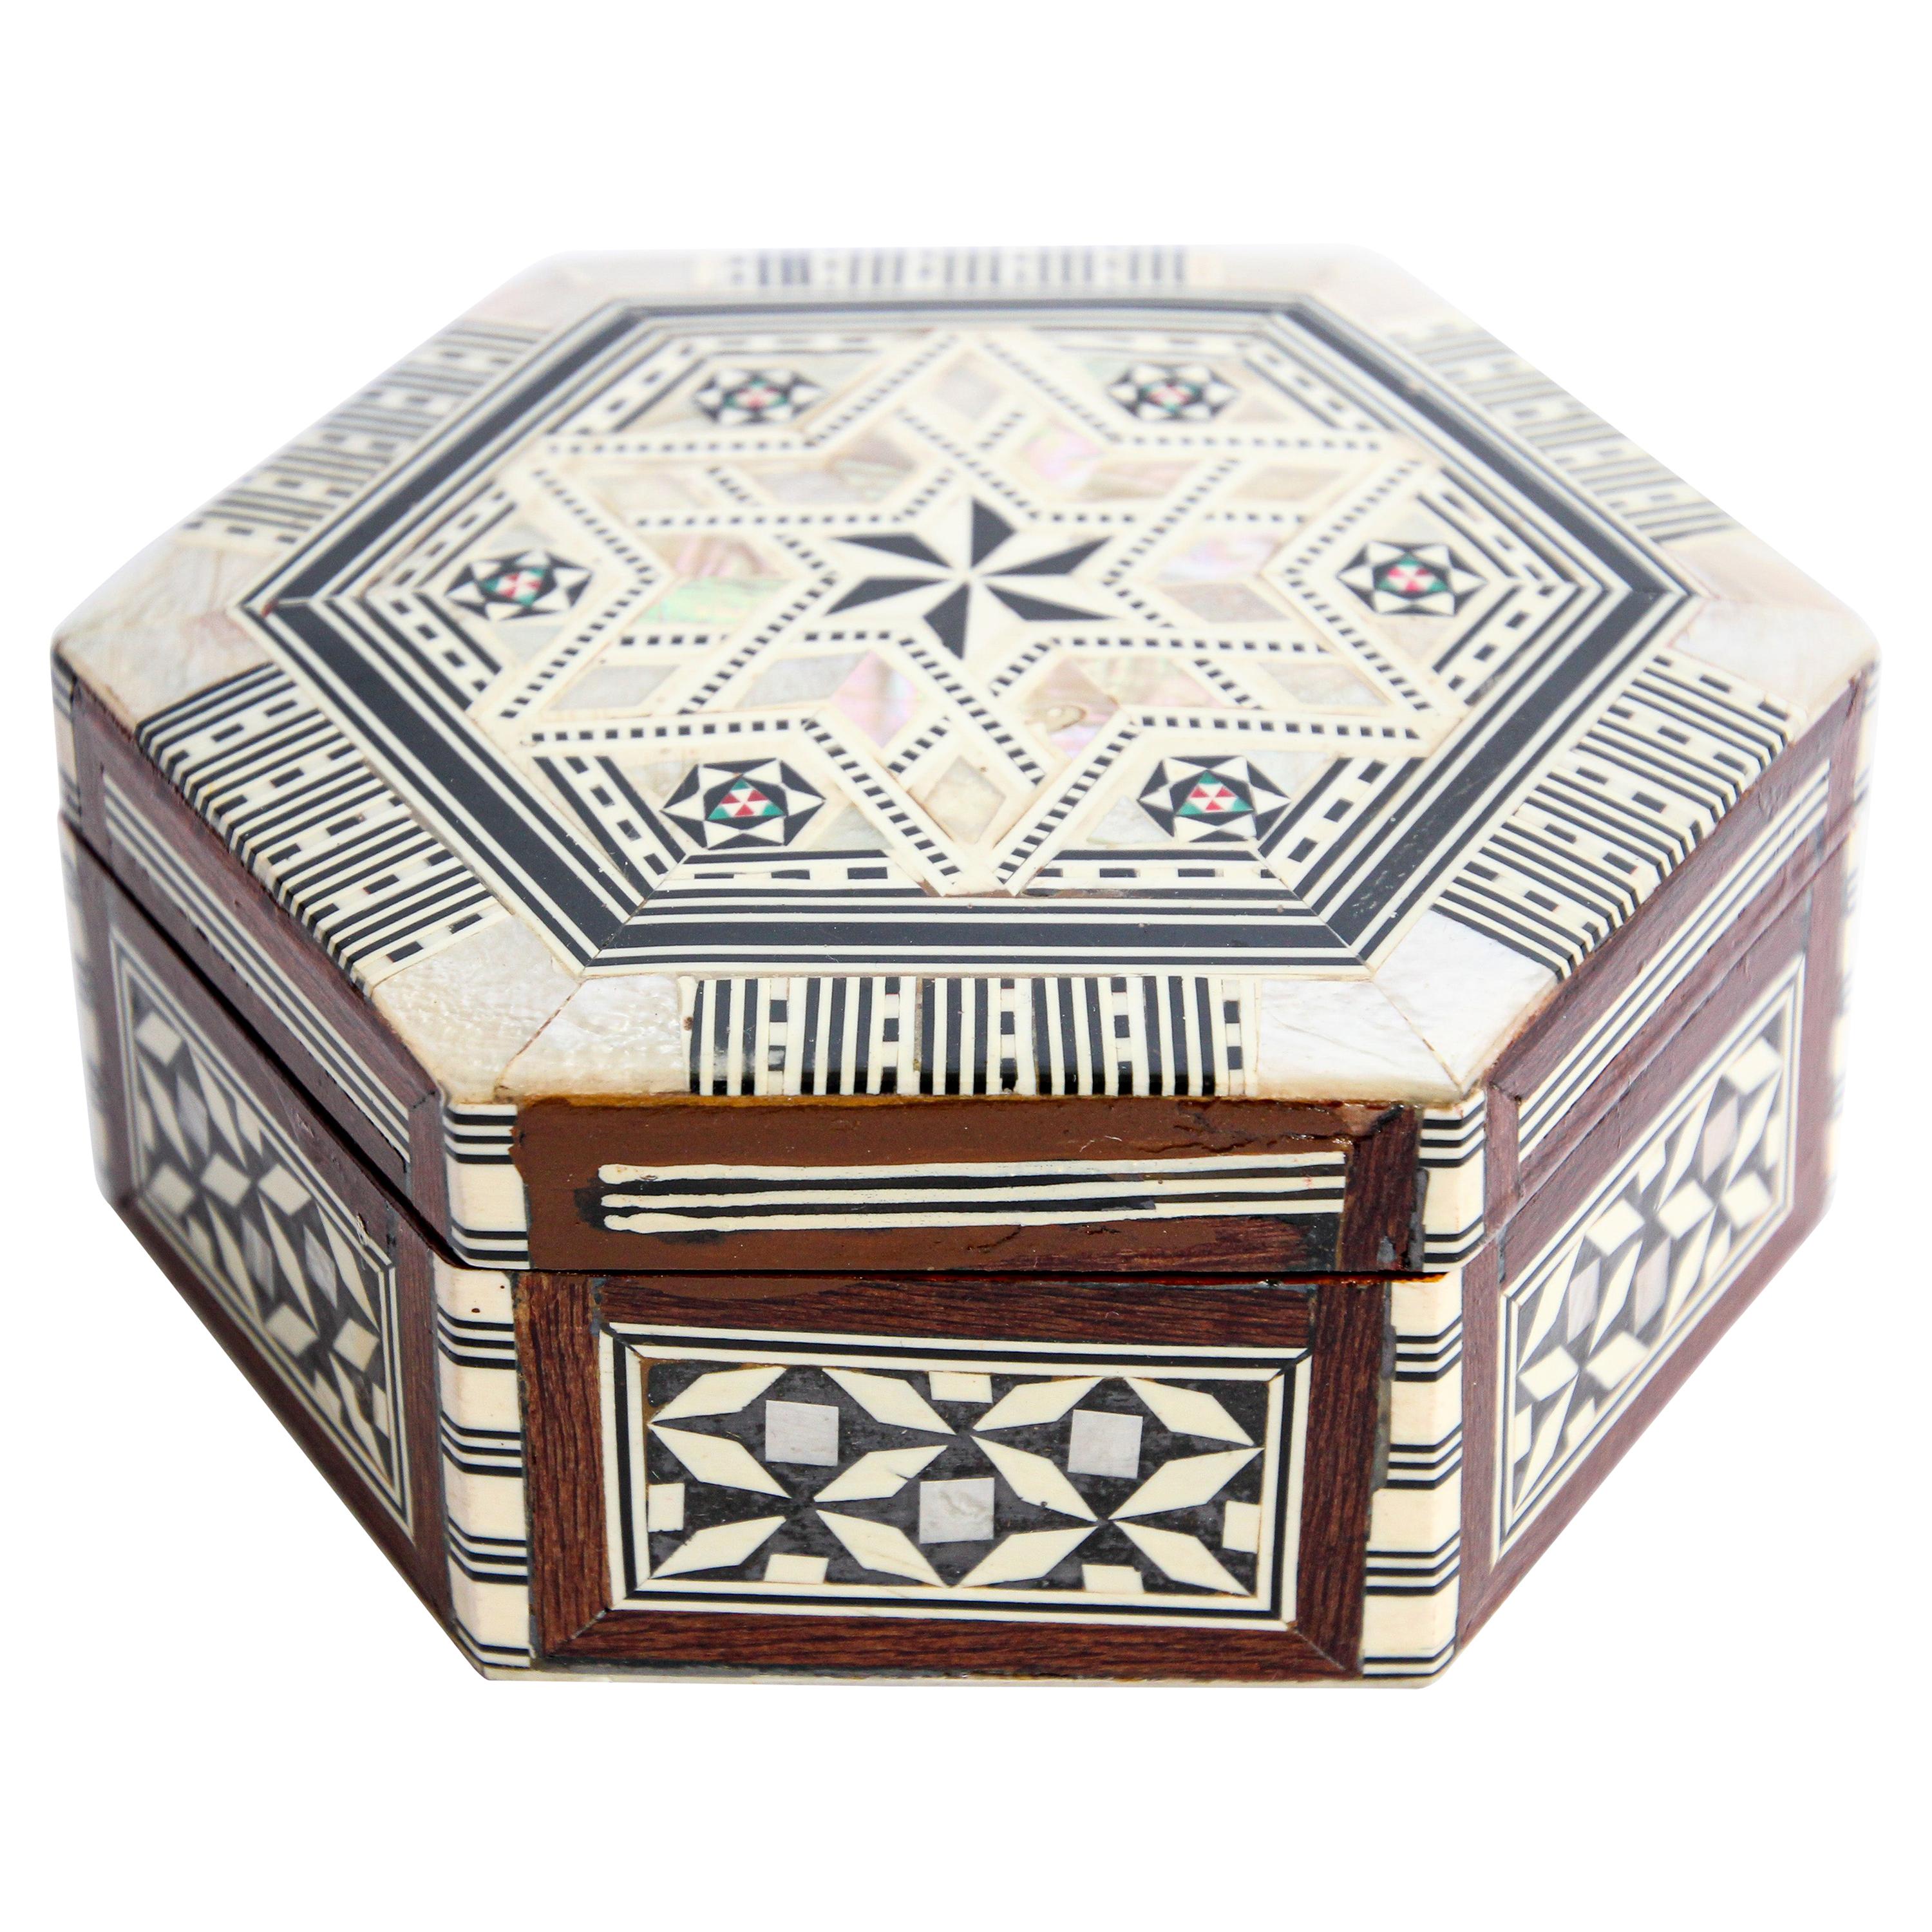 Moorish Handcrafted Octagonal Box with White Mosaic Marquetry